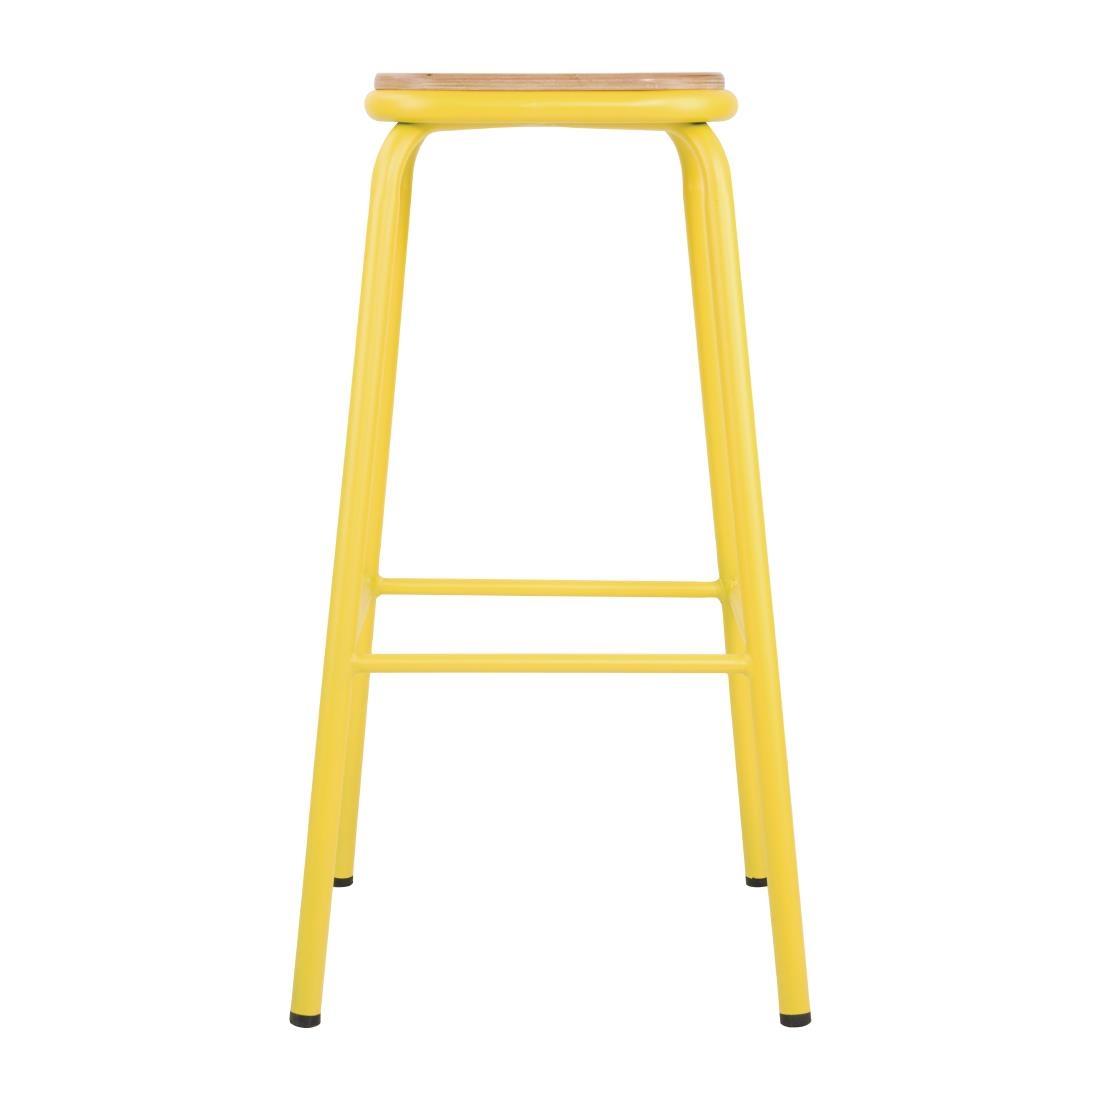 Bolero Cantina High Stools with Wooden Seat Pad Yellow (Pack of 4) - FB941  - 2